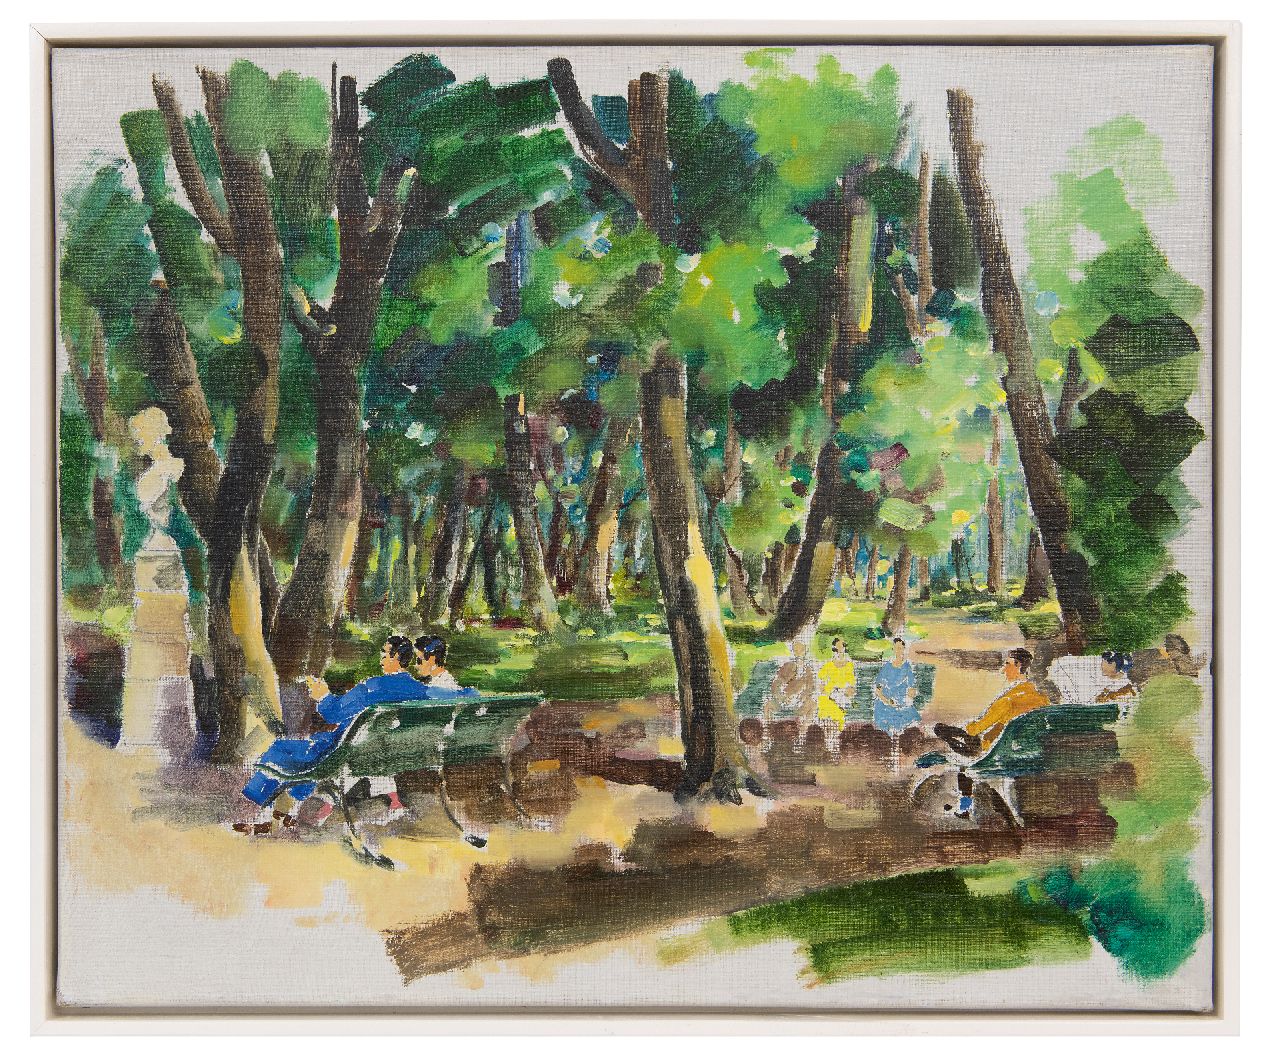 Kruizinga D.  | Dirk Kruizinga | Paintings offered for sale | A summer day in the parc, oil on canvas 50.3 x 60.3 cm